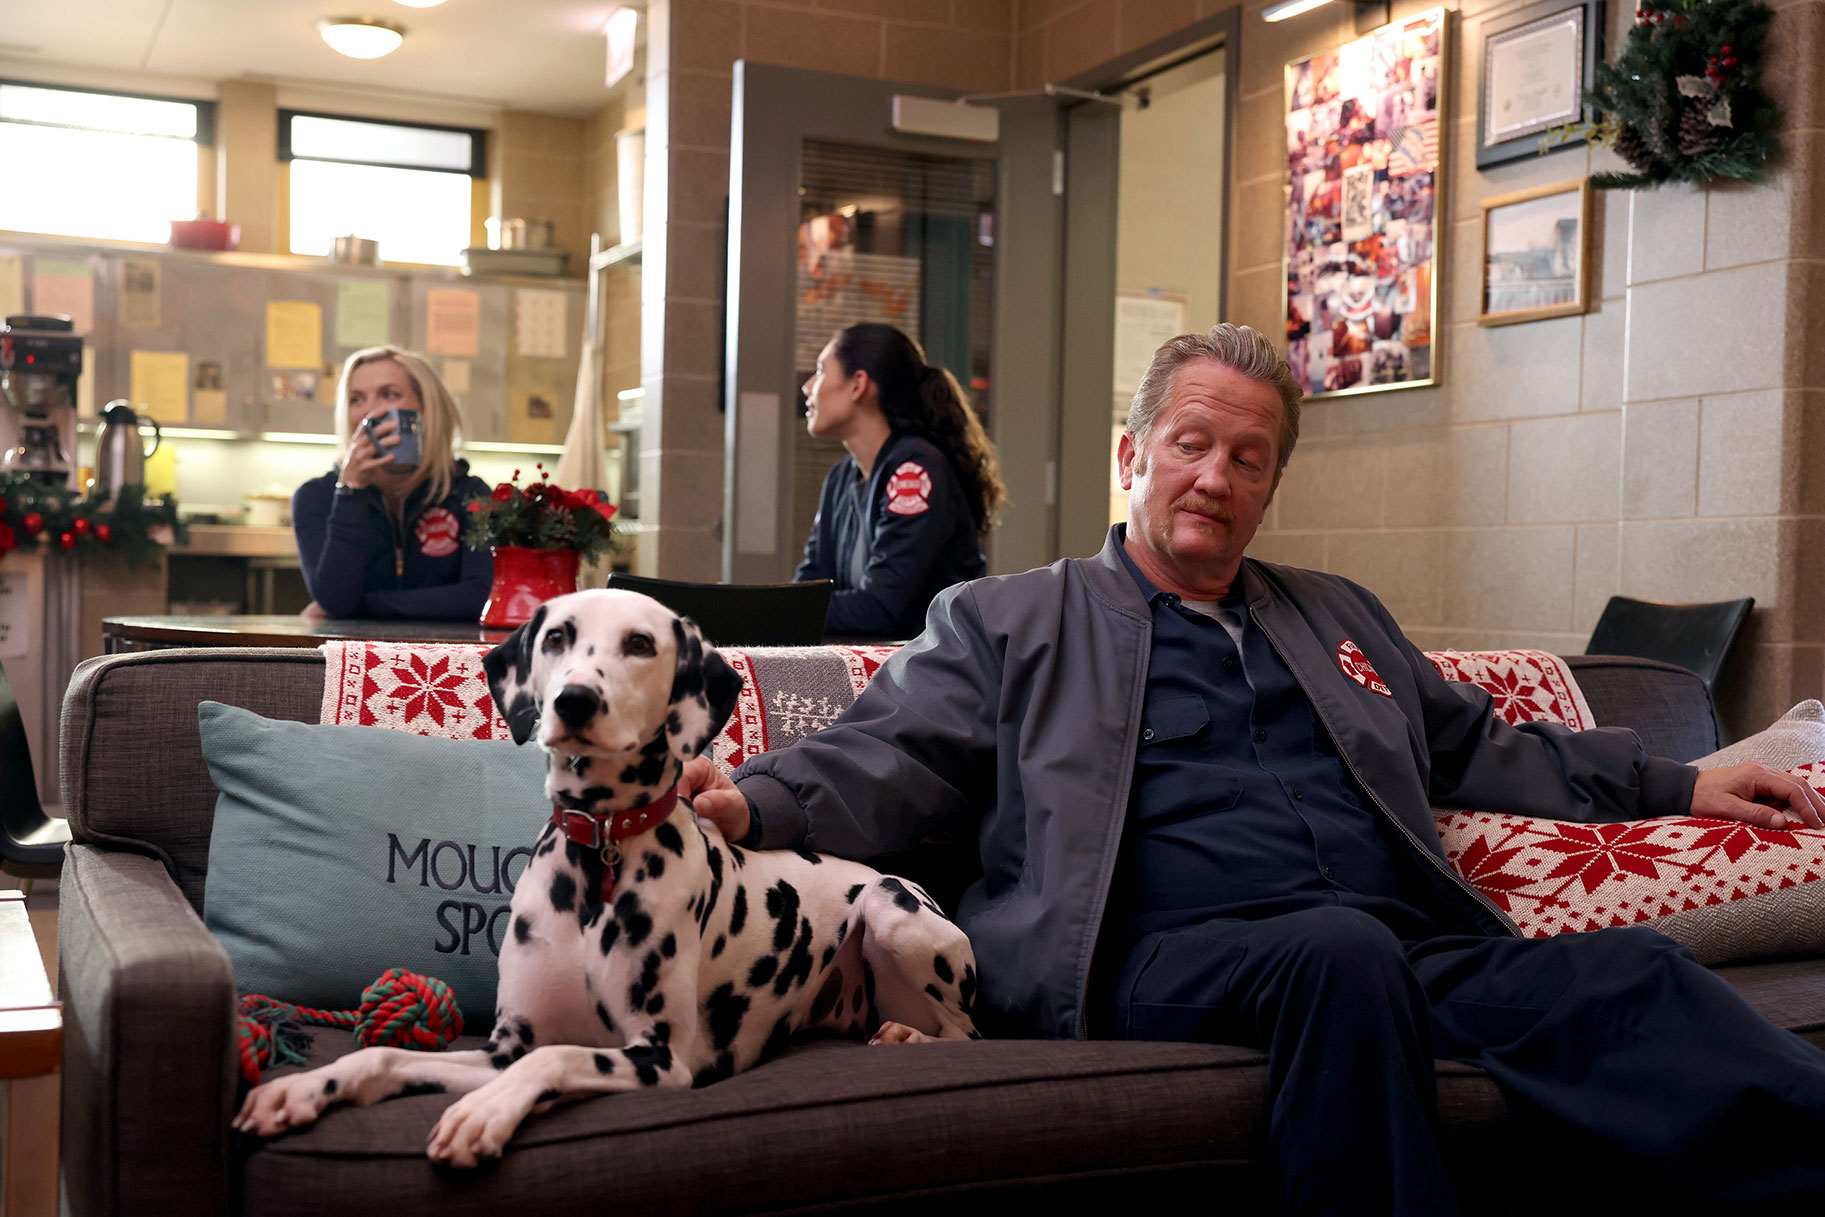 Tuesday the dalmatian sits on the firehouse couch with Mouch